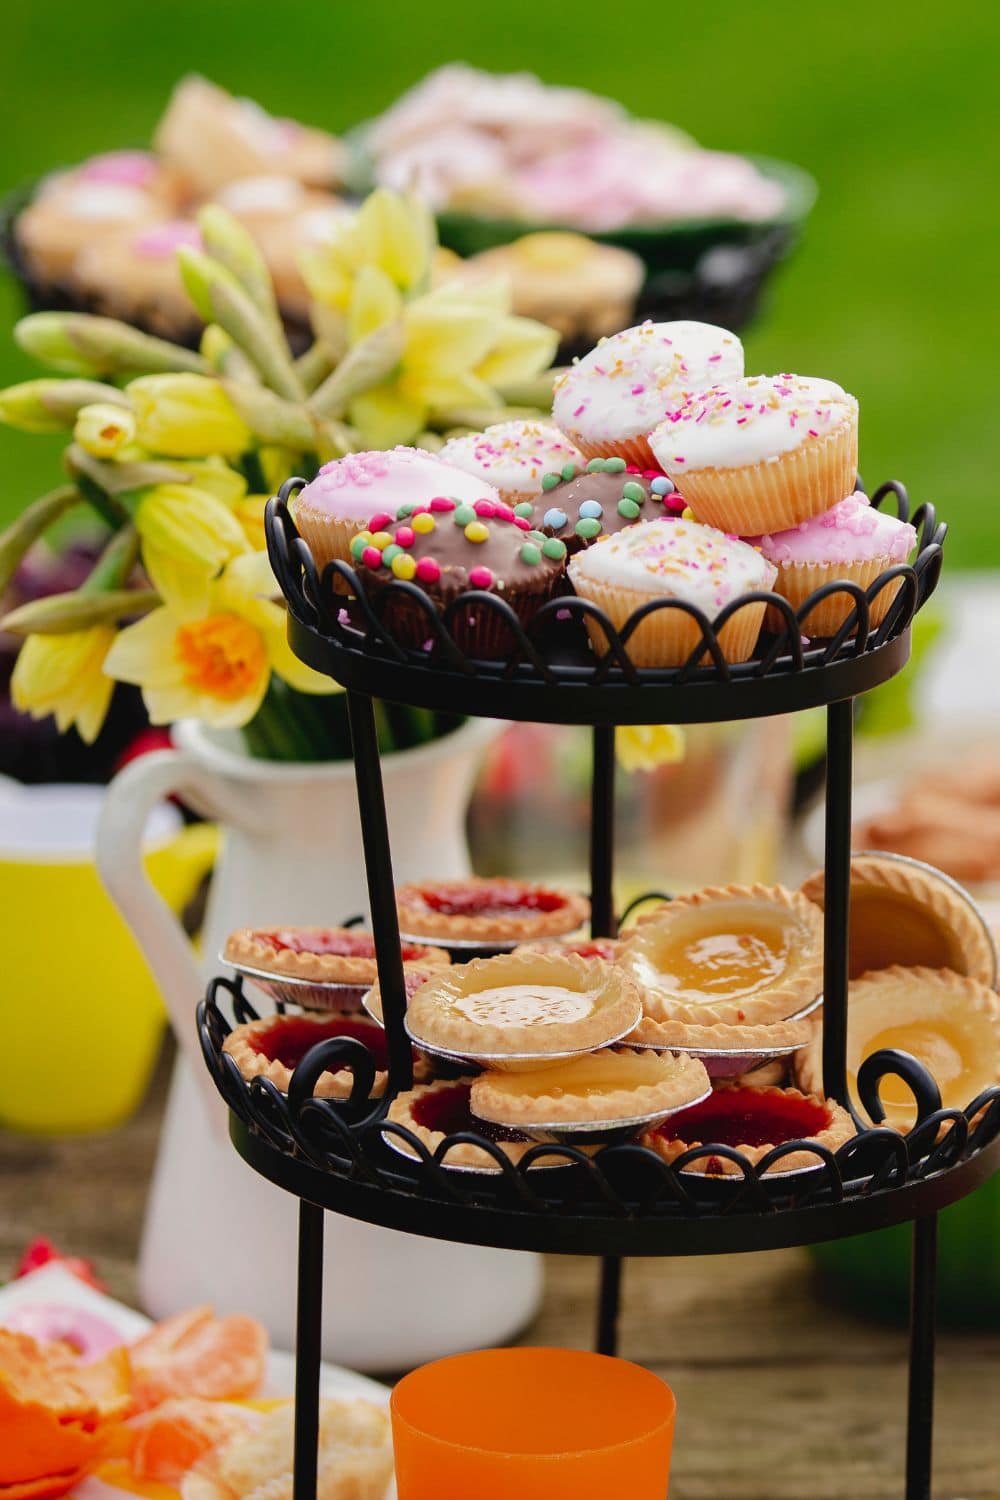 6 Tips for Throwing an amazing party